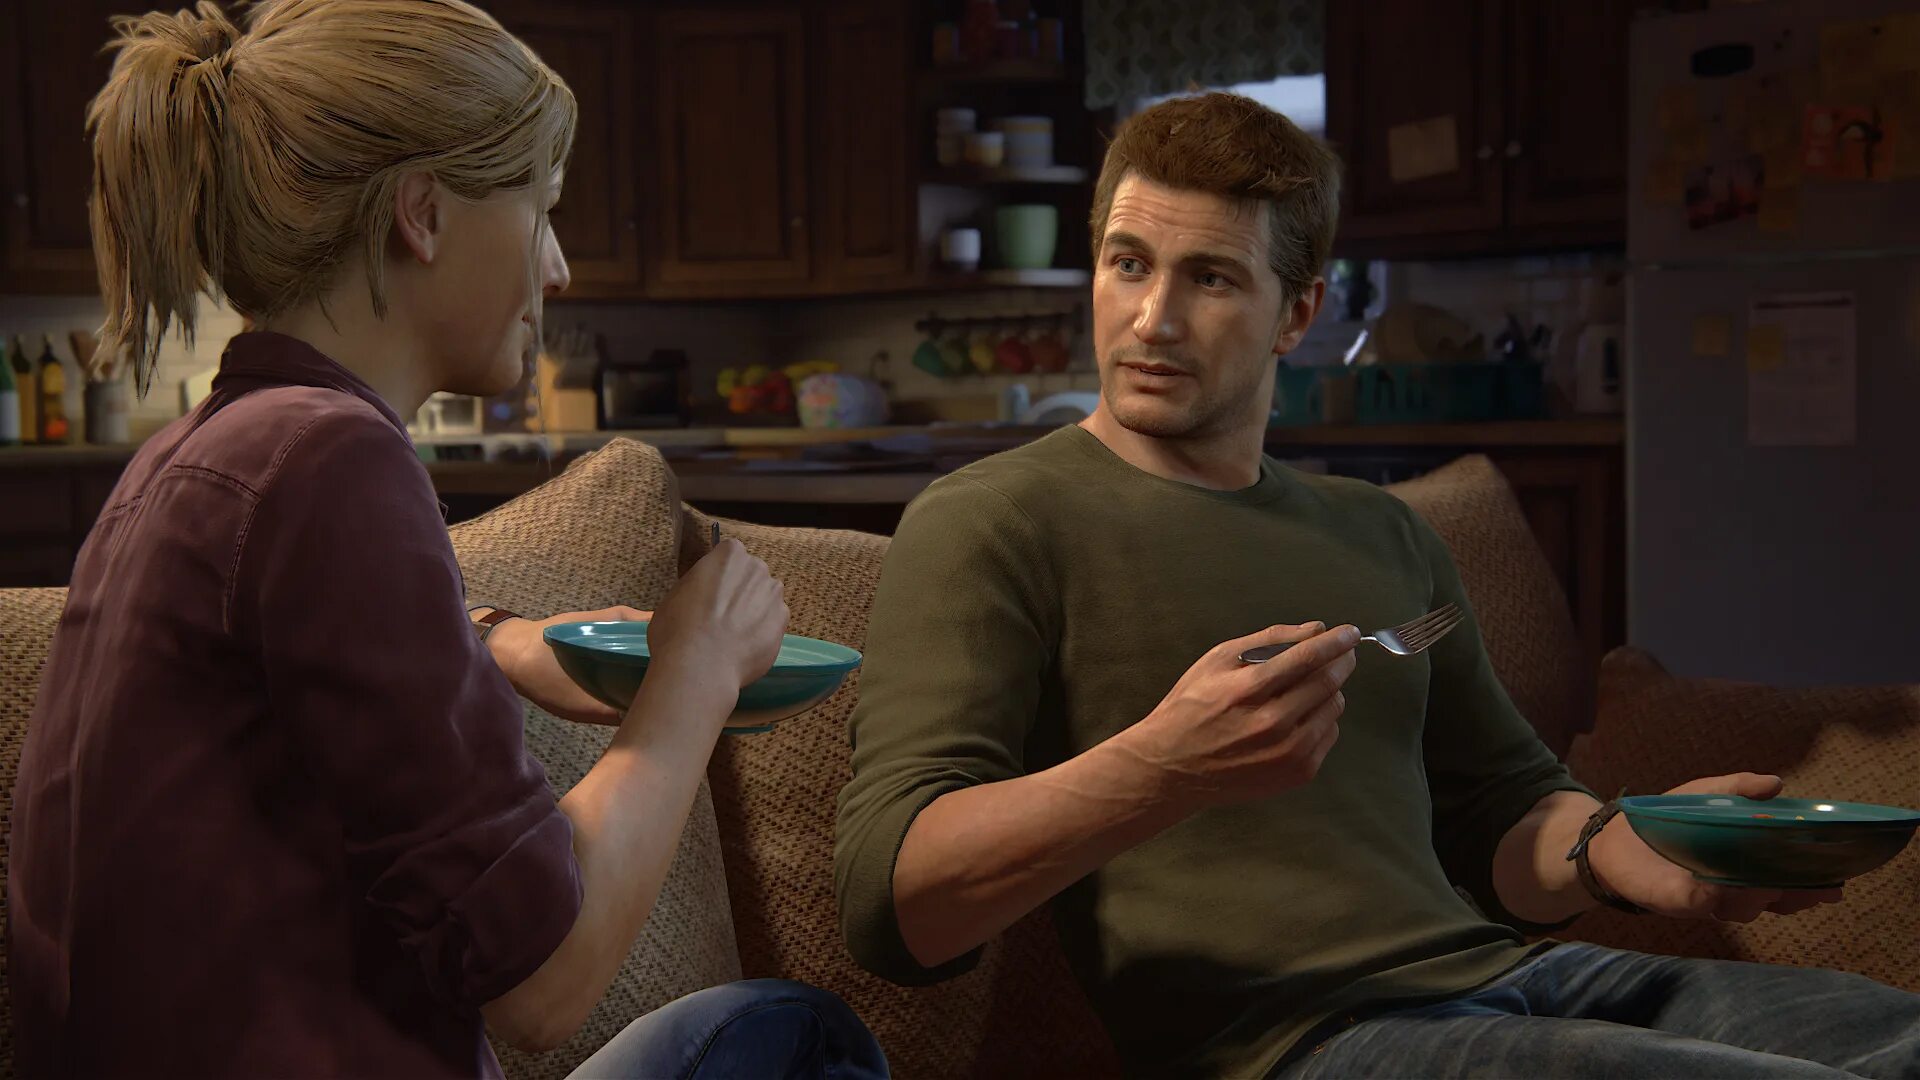 Uncharted 4. Uncharted 4 Елена и Дрейк. Нейт и Елена Uncharted. Uncharted 4 Натан и Елена. Uncharted Nathan and Elena.